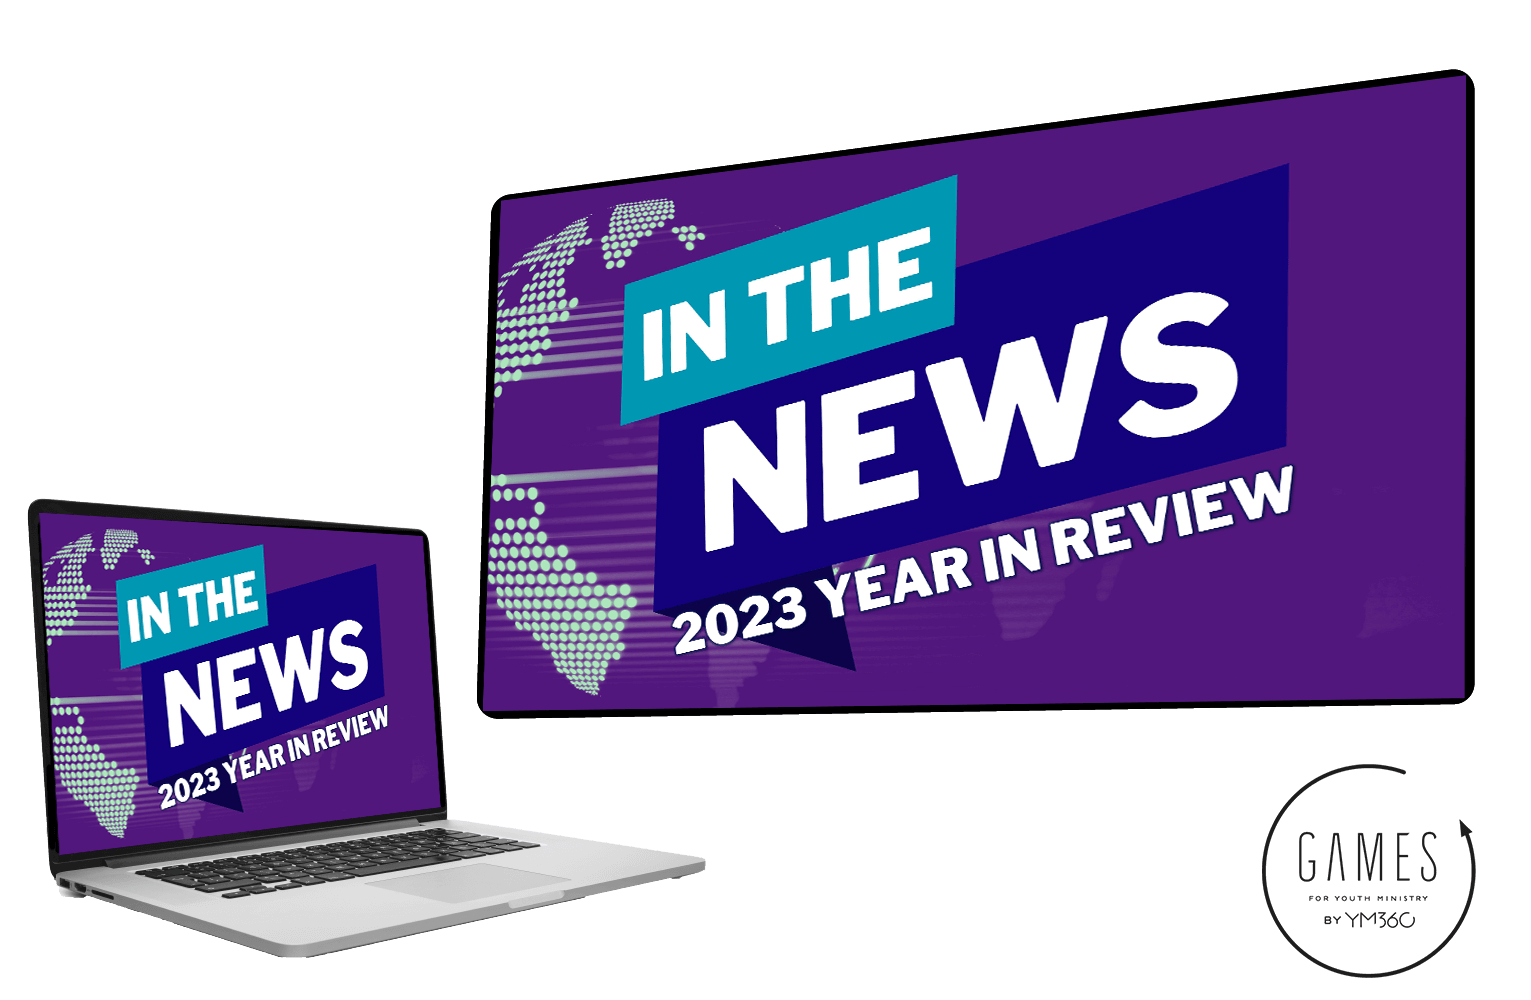 In The News: 2023 Year In Review